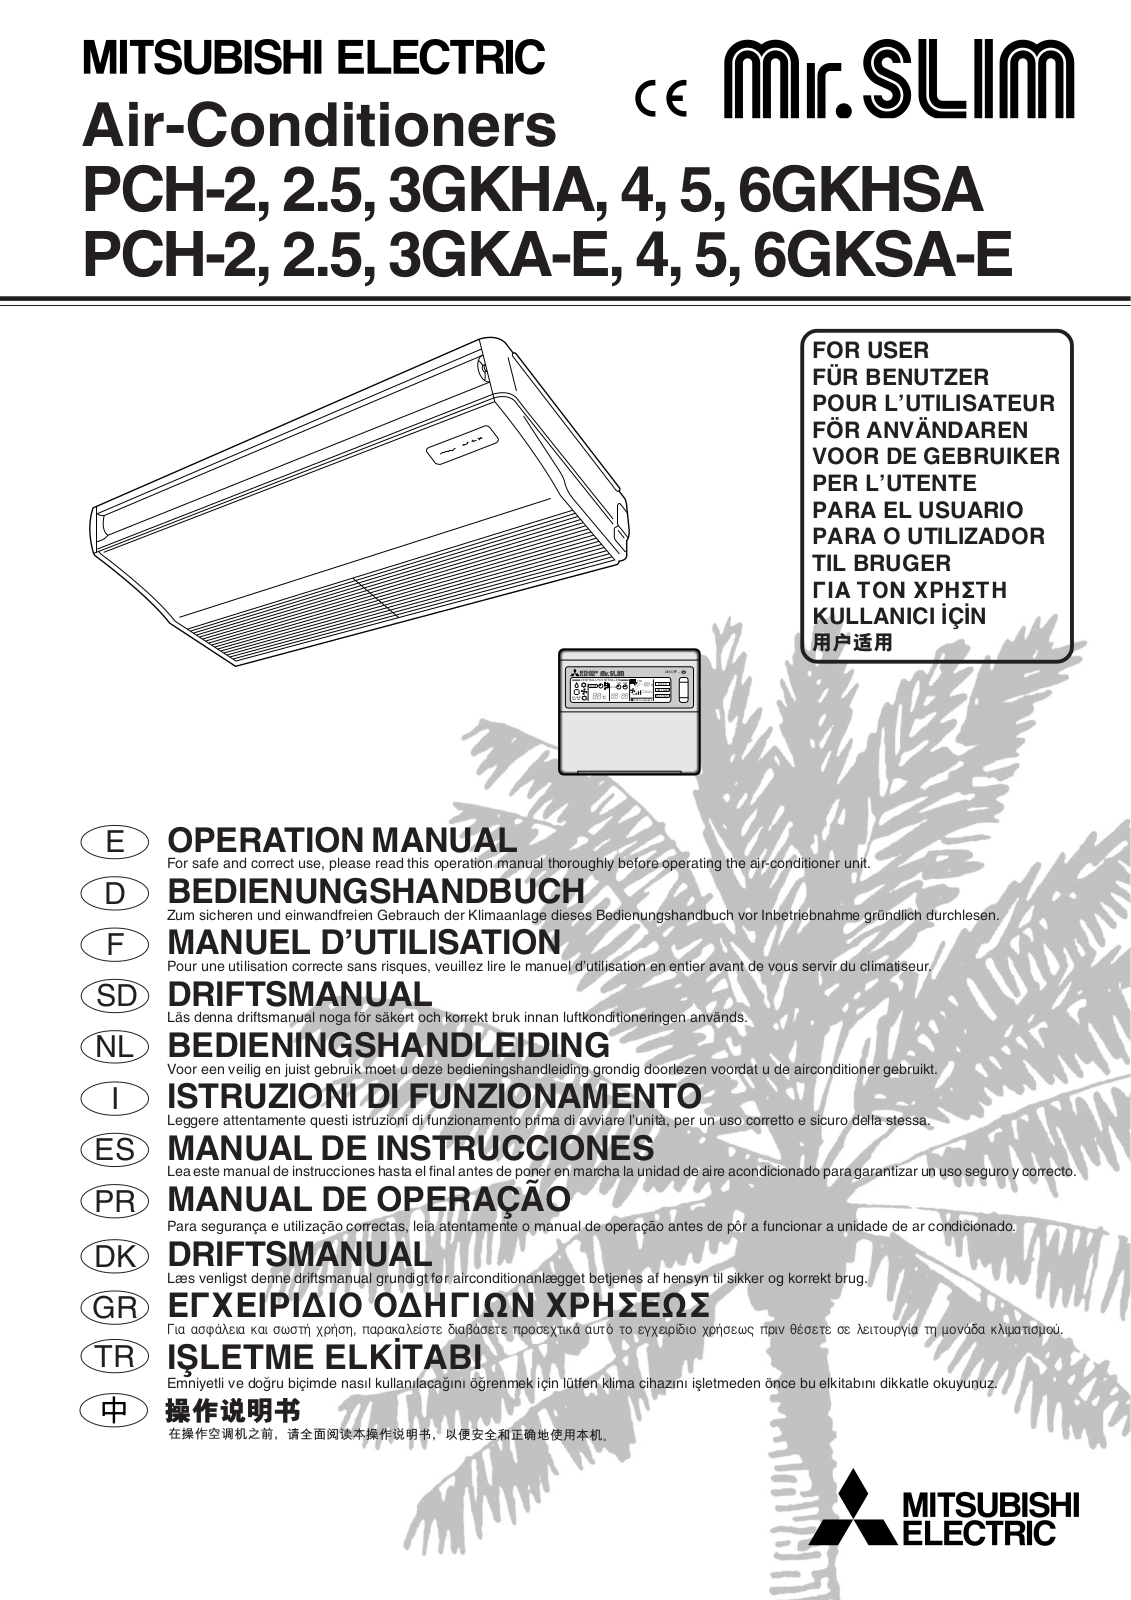 Mitsubishi PCH-2GKHA, PCH-2.5GKHA, PCH-3GKHA, PCH-4GKHSA, PCH-5GKHSA User Manual